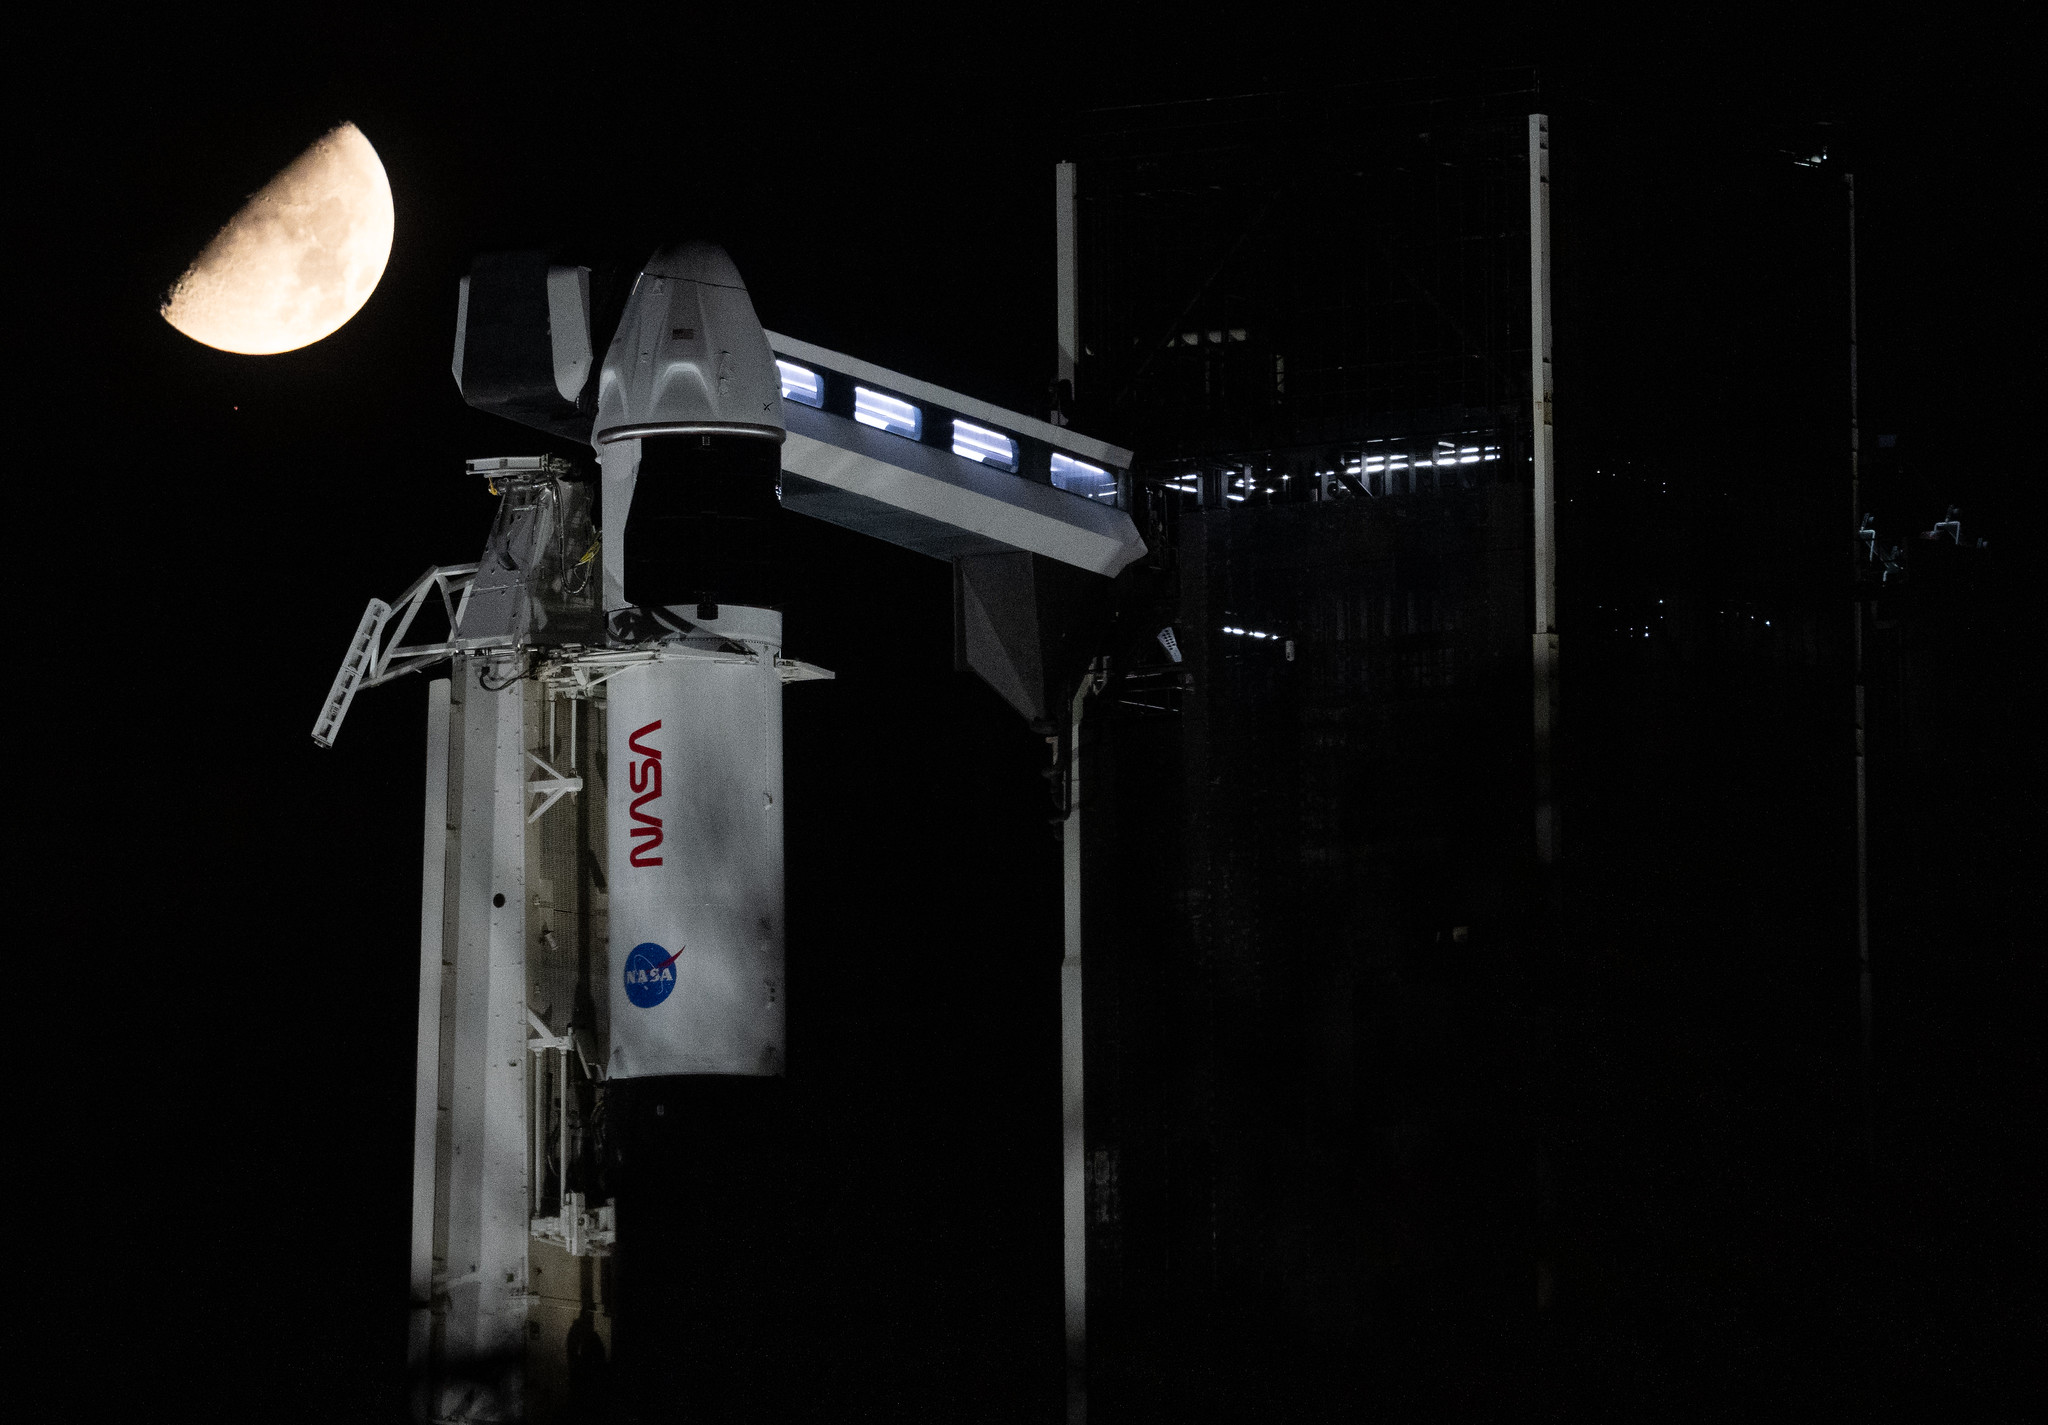 a spacecraft reading "NASA" at night with a dark sky and bright moon